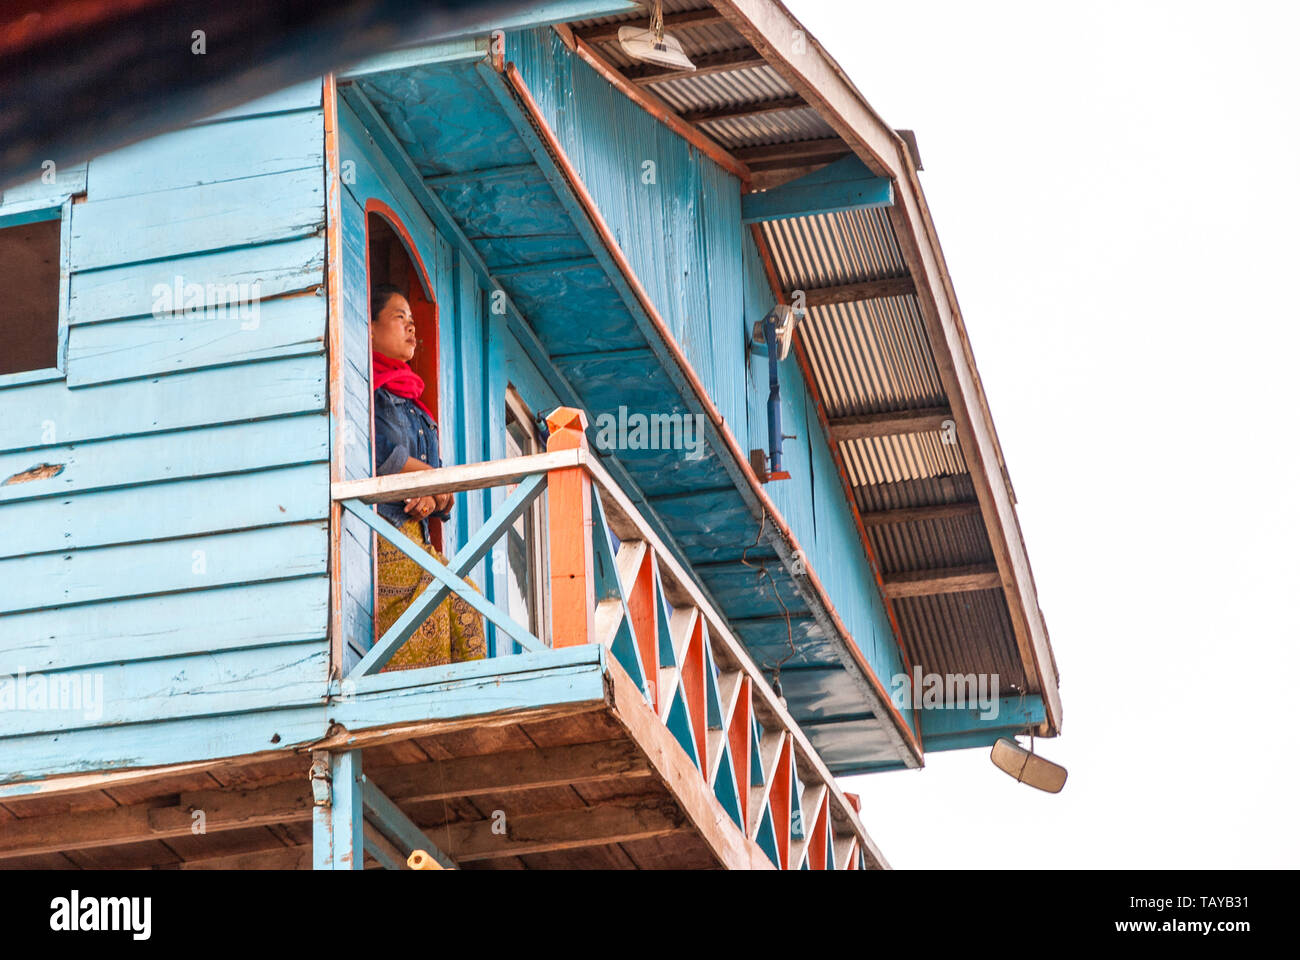 Nakaraj Nakhon, Laos - Feb 2016: Woman proudly standing and looking over the balcony from floating house on the ship on Mekong river Stock Photo